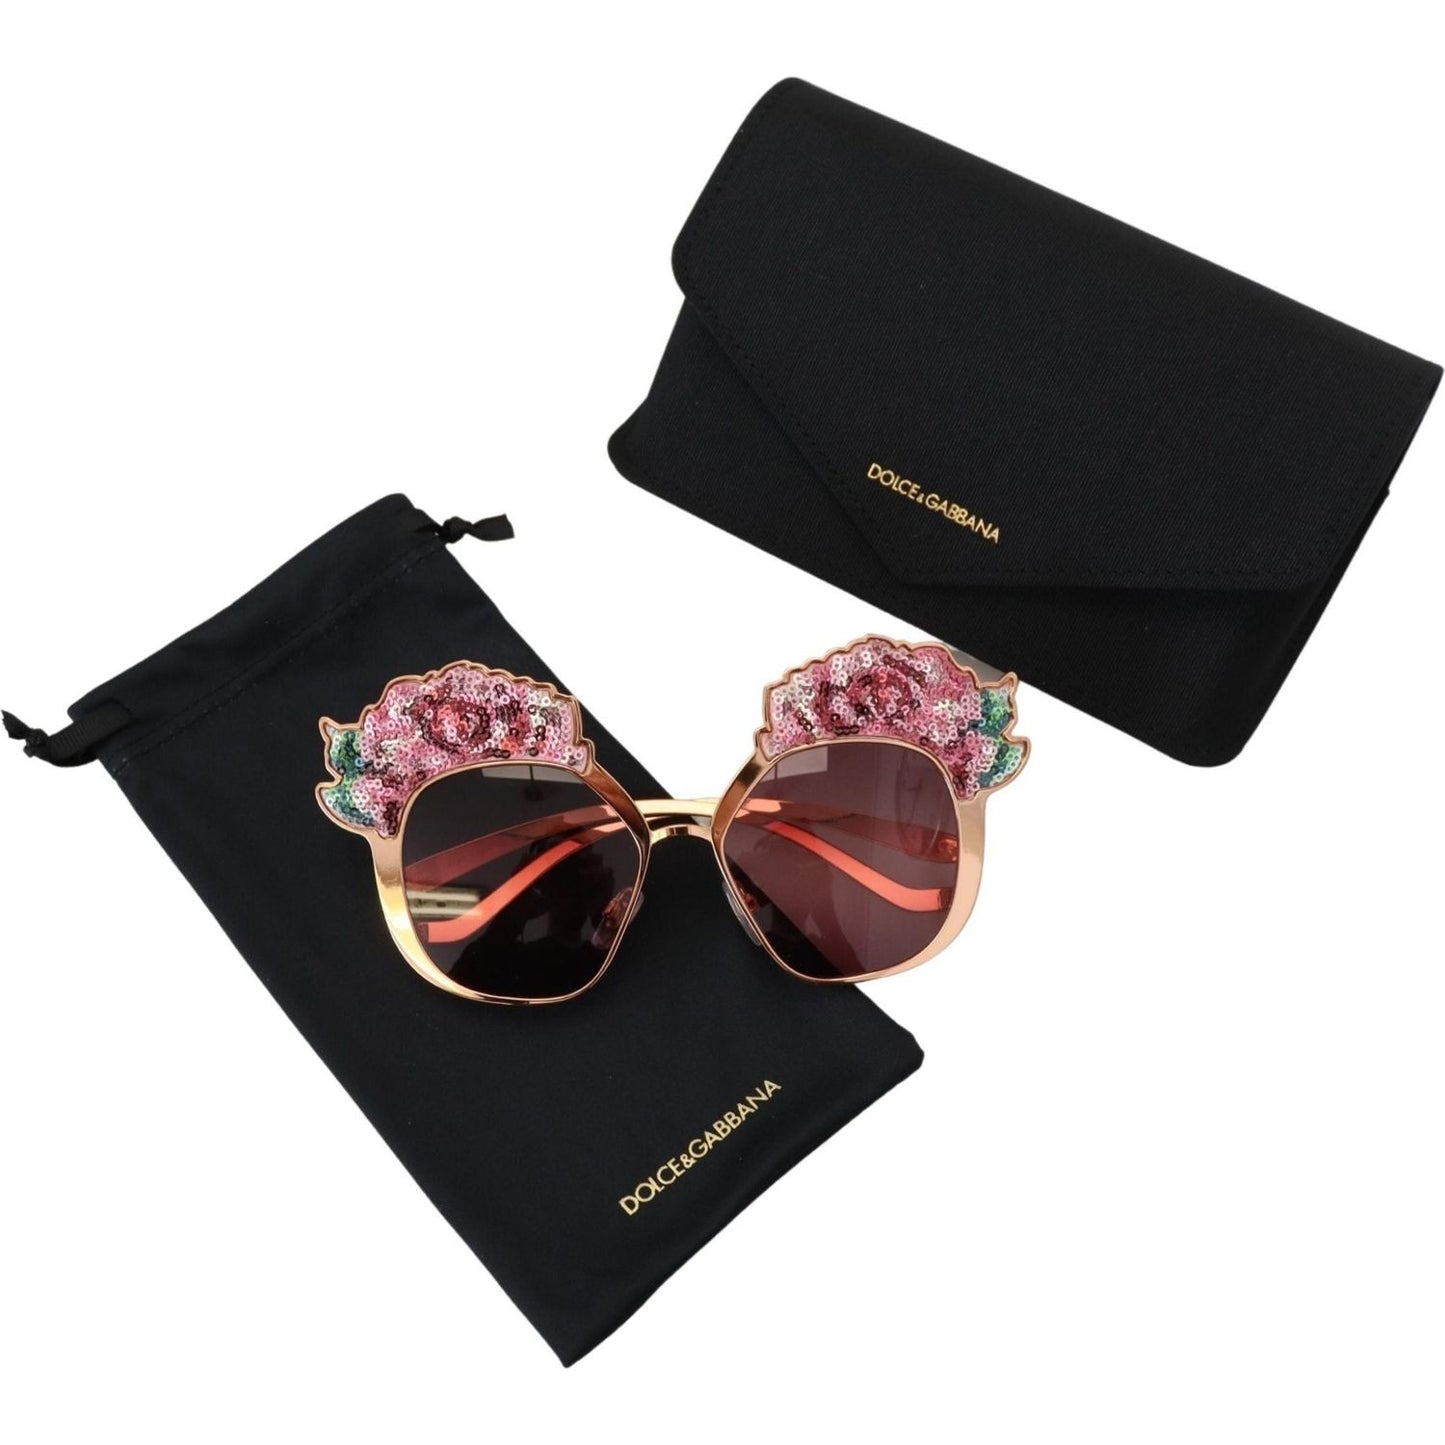 Dolce & Gabbana Chic Rose Sequin Embroidered Sunglasses pink-gold-rose-sequin-embroidery-dg2202-sunglasses IMG_5701-1-scaled-143ac454-875.jpg